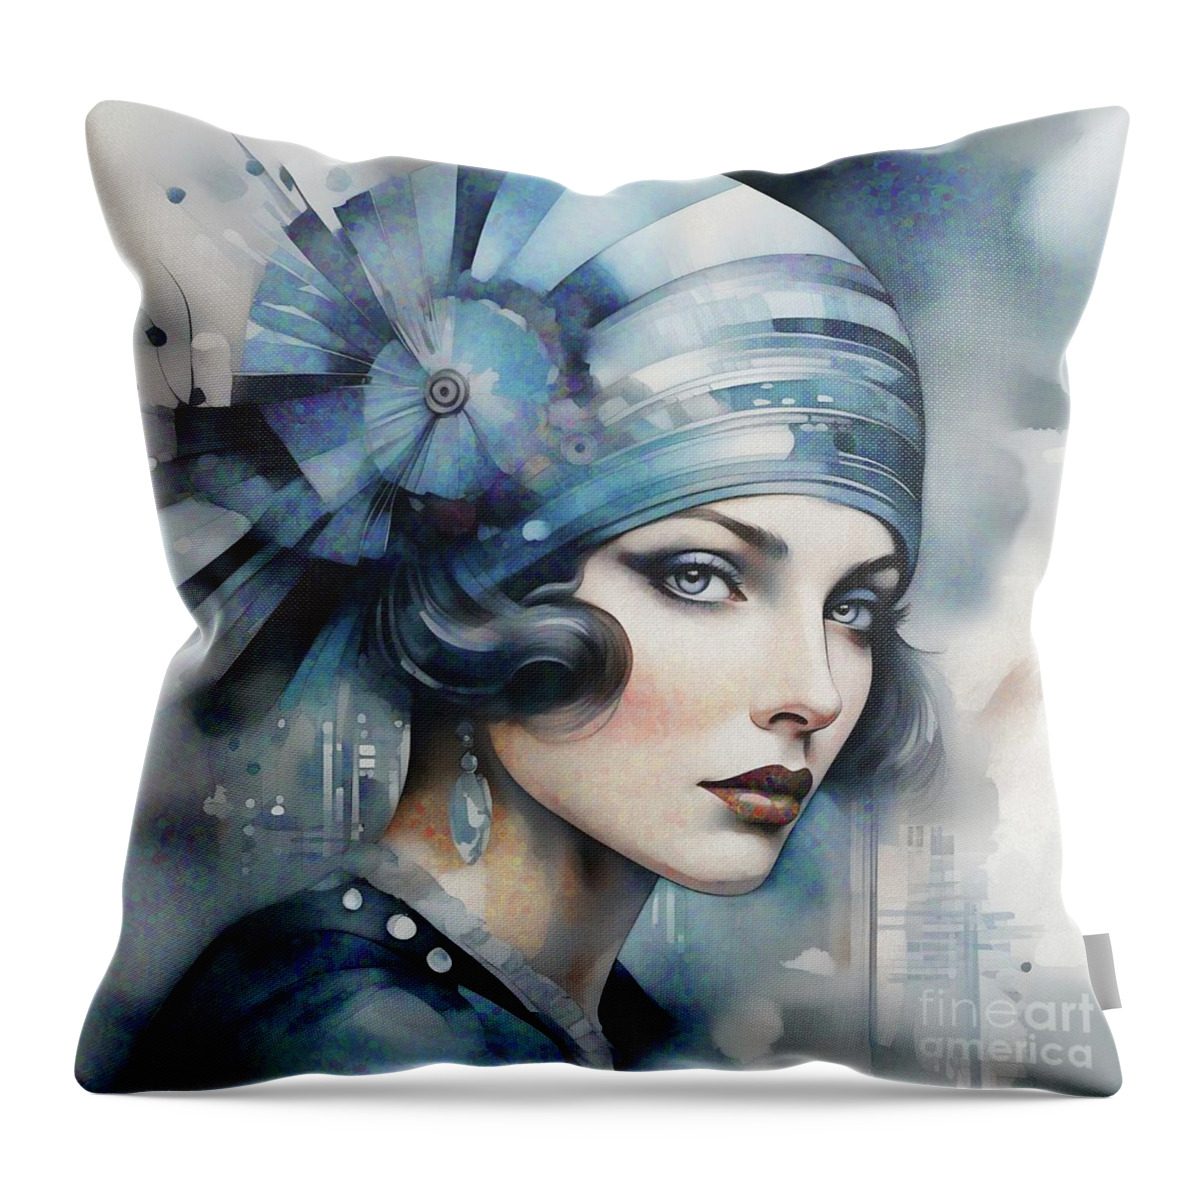 Abstract Throw Pillow featuring the digital art Art Deco Style Portrait - 02279 by Philip Preston